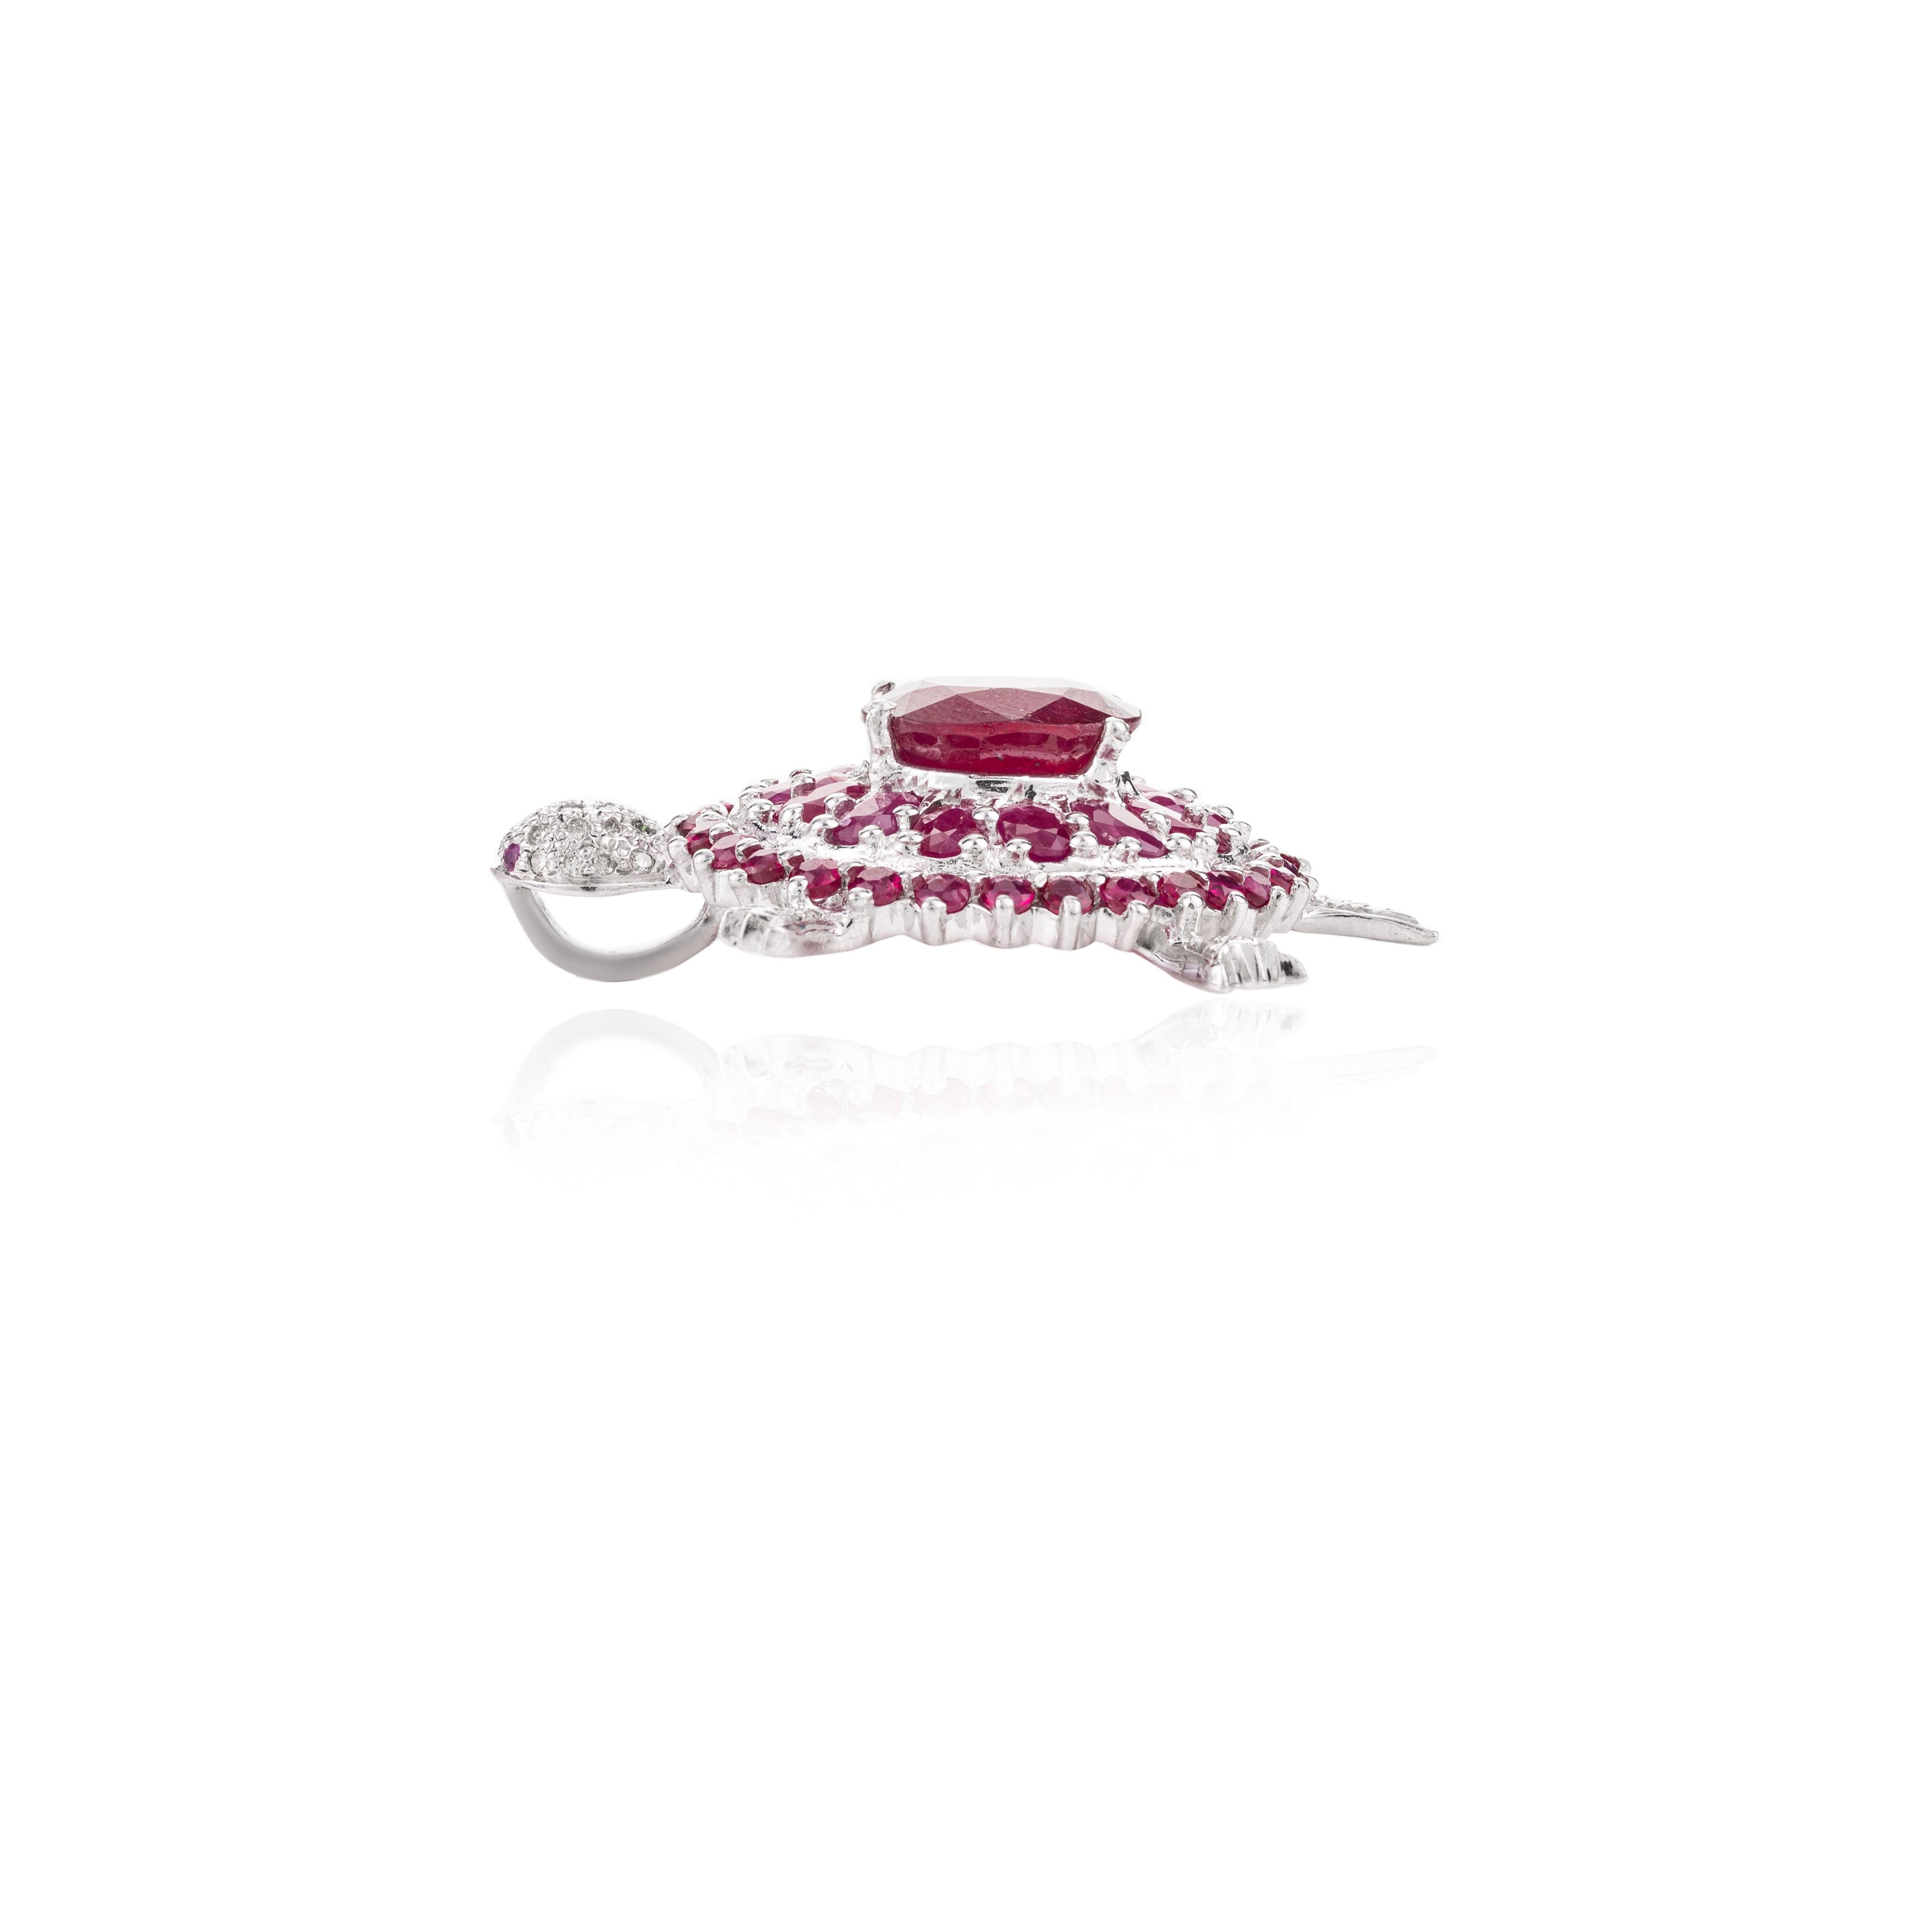 Mixed Cut 10.75 Carat Genuine Ruby Birthstone and Diamond Turtle Pendant in 925 Silver  For Sale